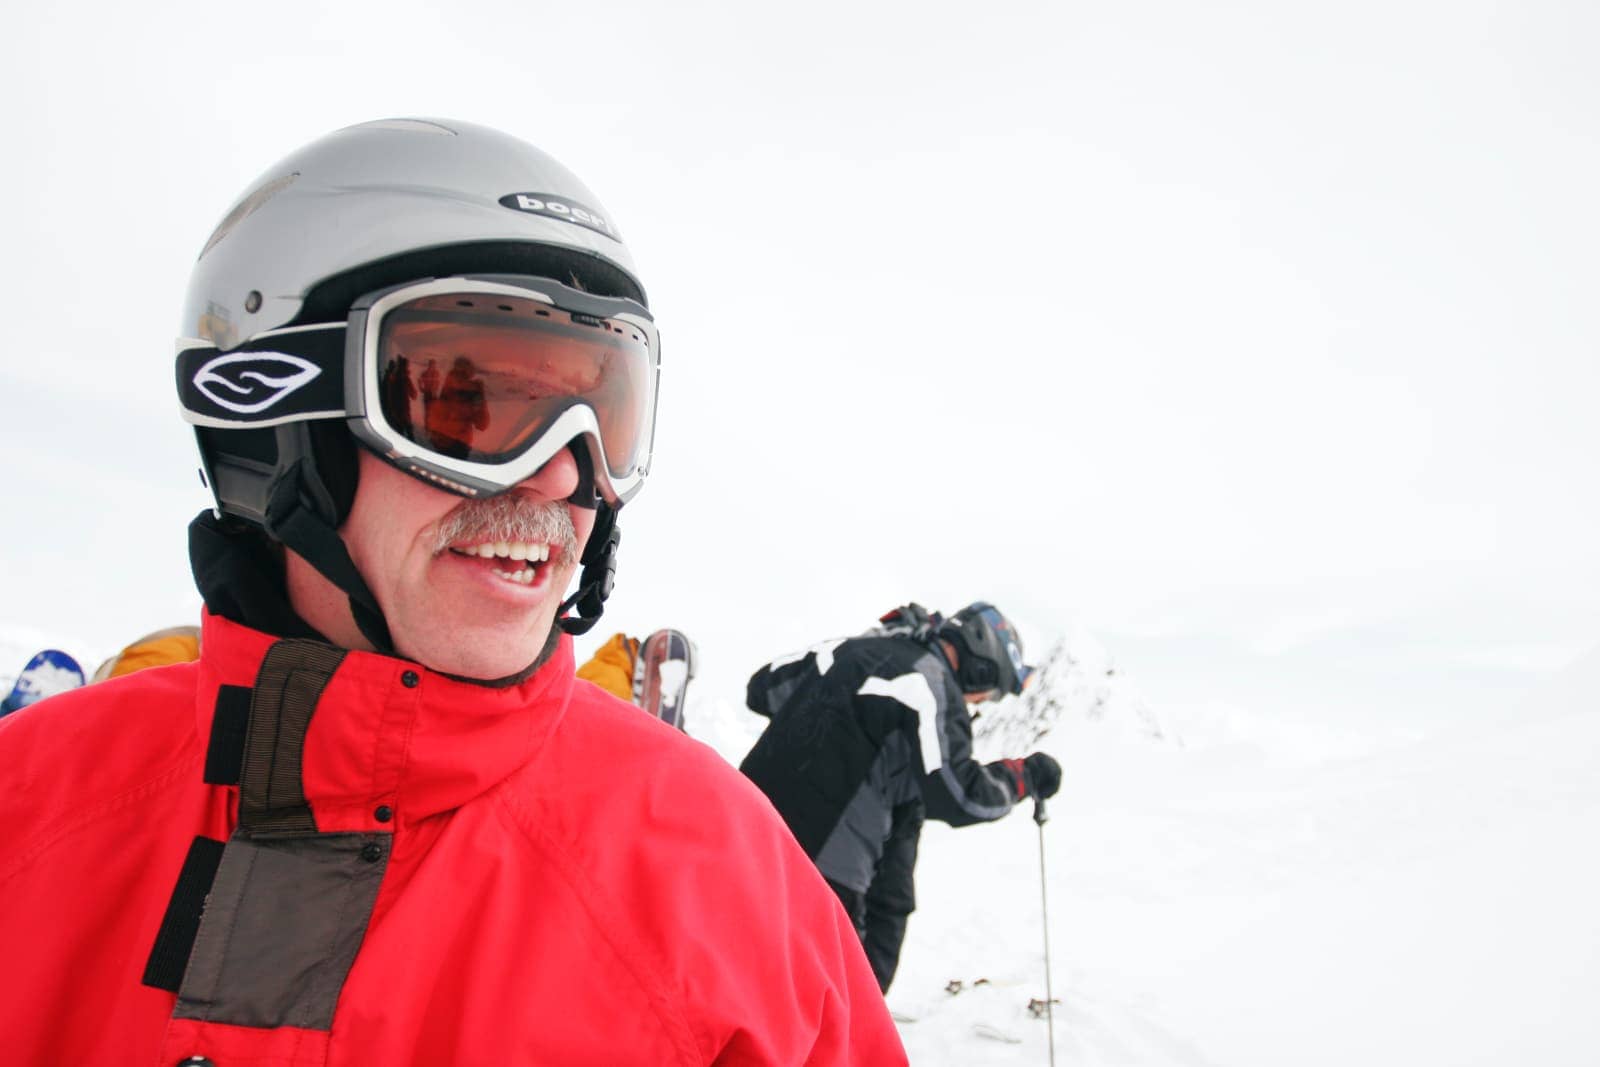 Man with orange tinted goggles and red jacket skiing